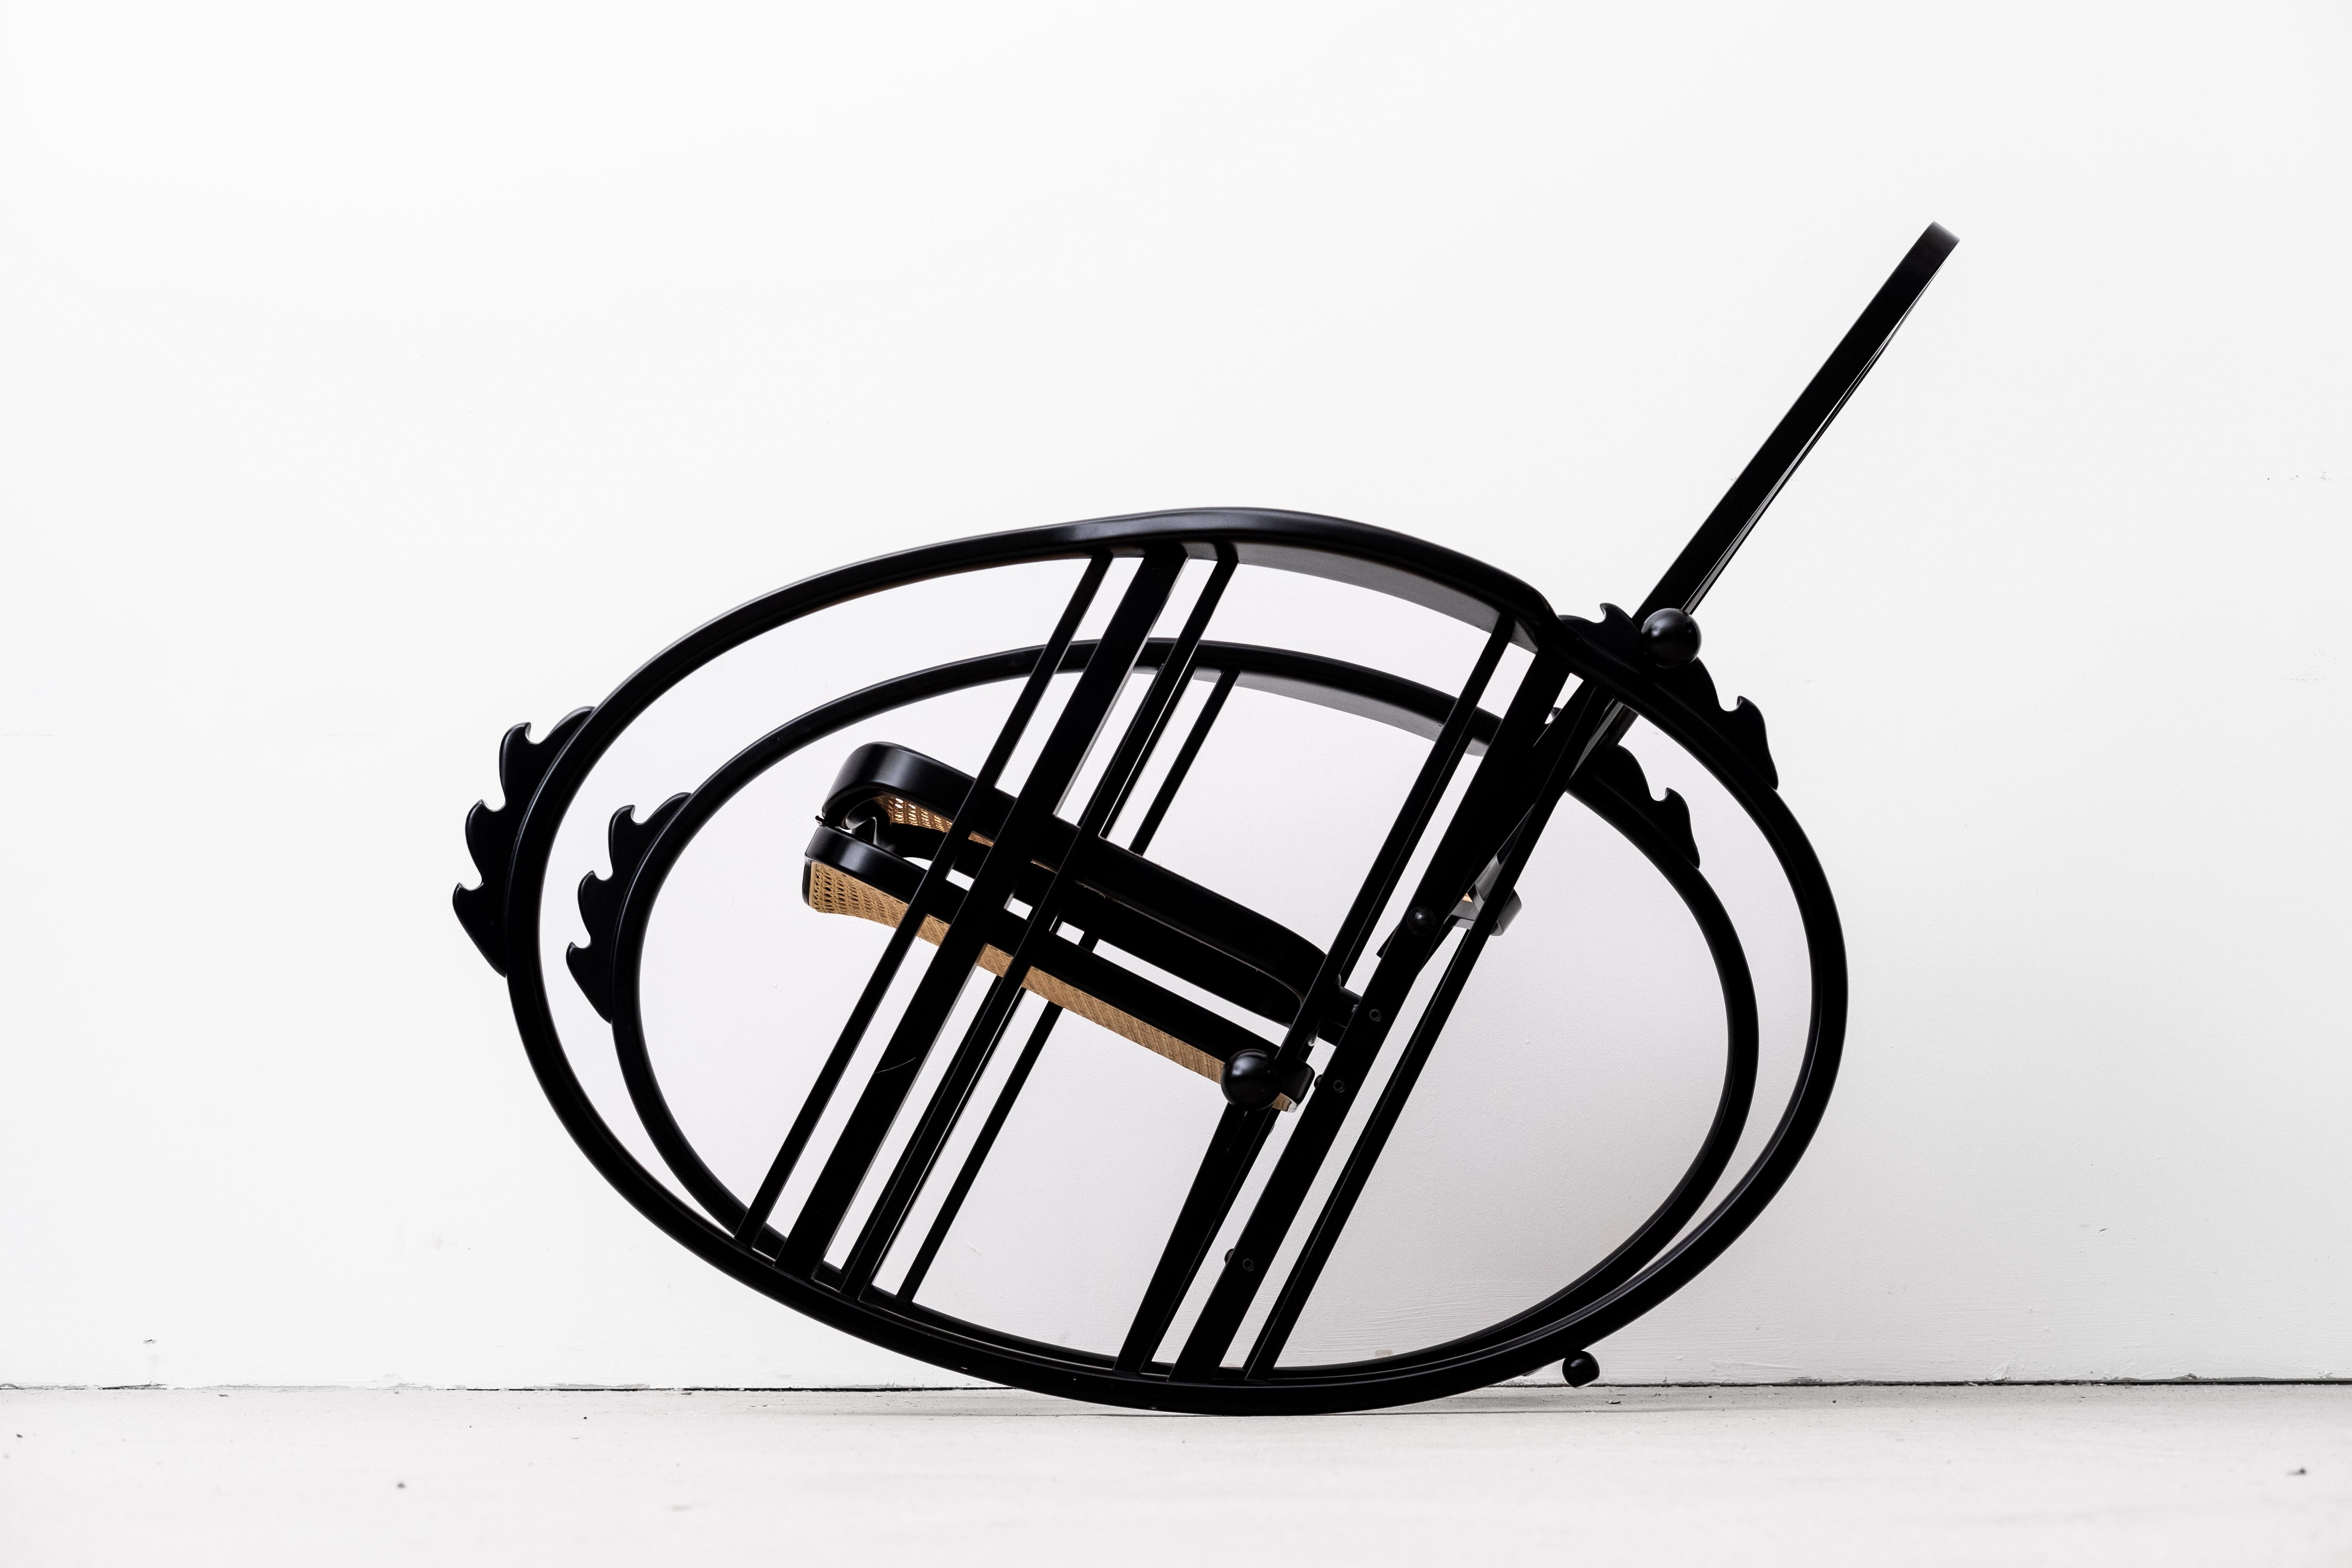 Egg-Rocking Chair by Antonio Volpe (Udine, 1922), ex. by Wittmann (Vienna, 1990) For Sale 3